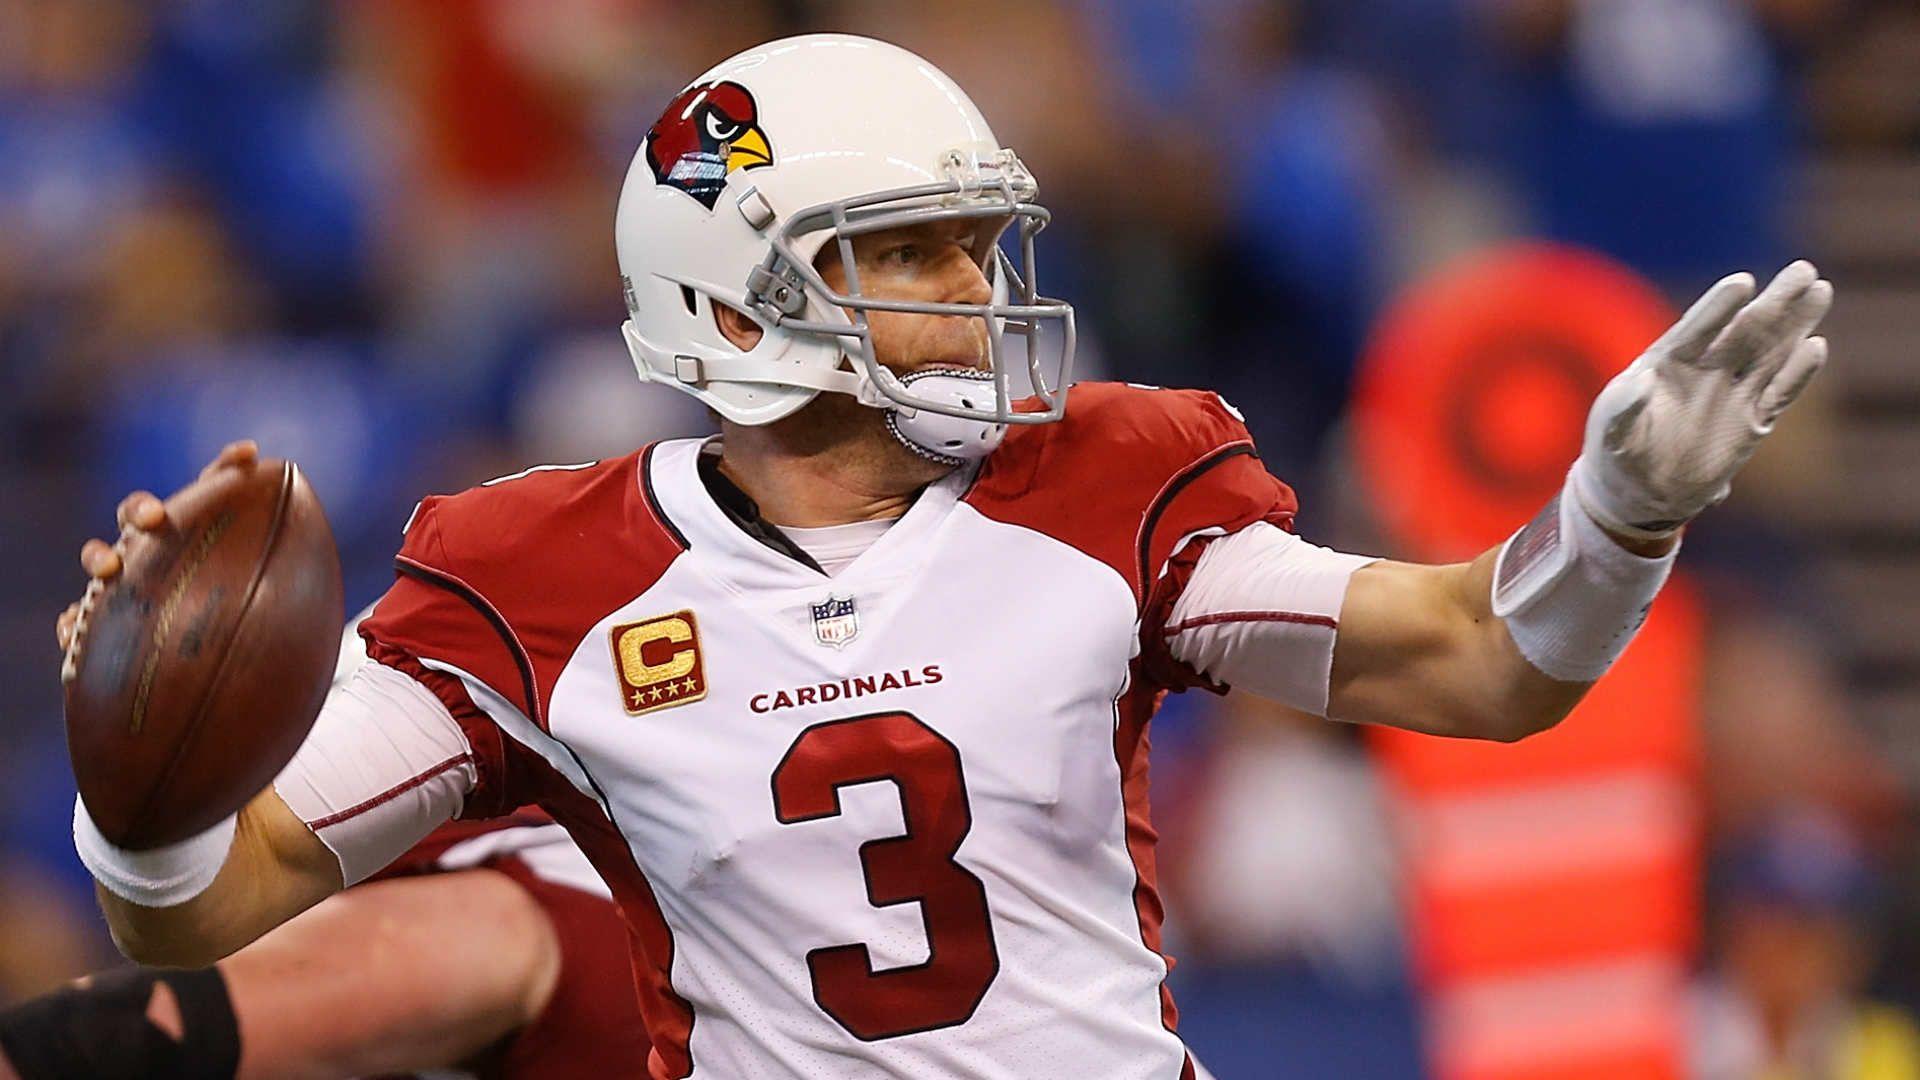 Carson Palmer arrives for Monday night game 'riding' a unicorn